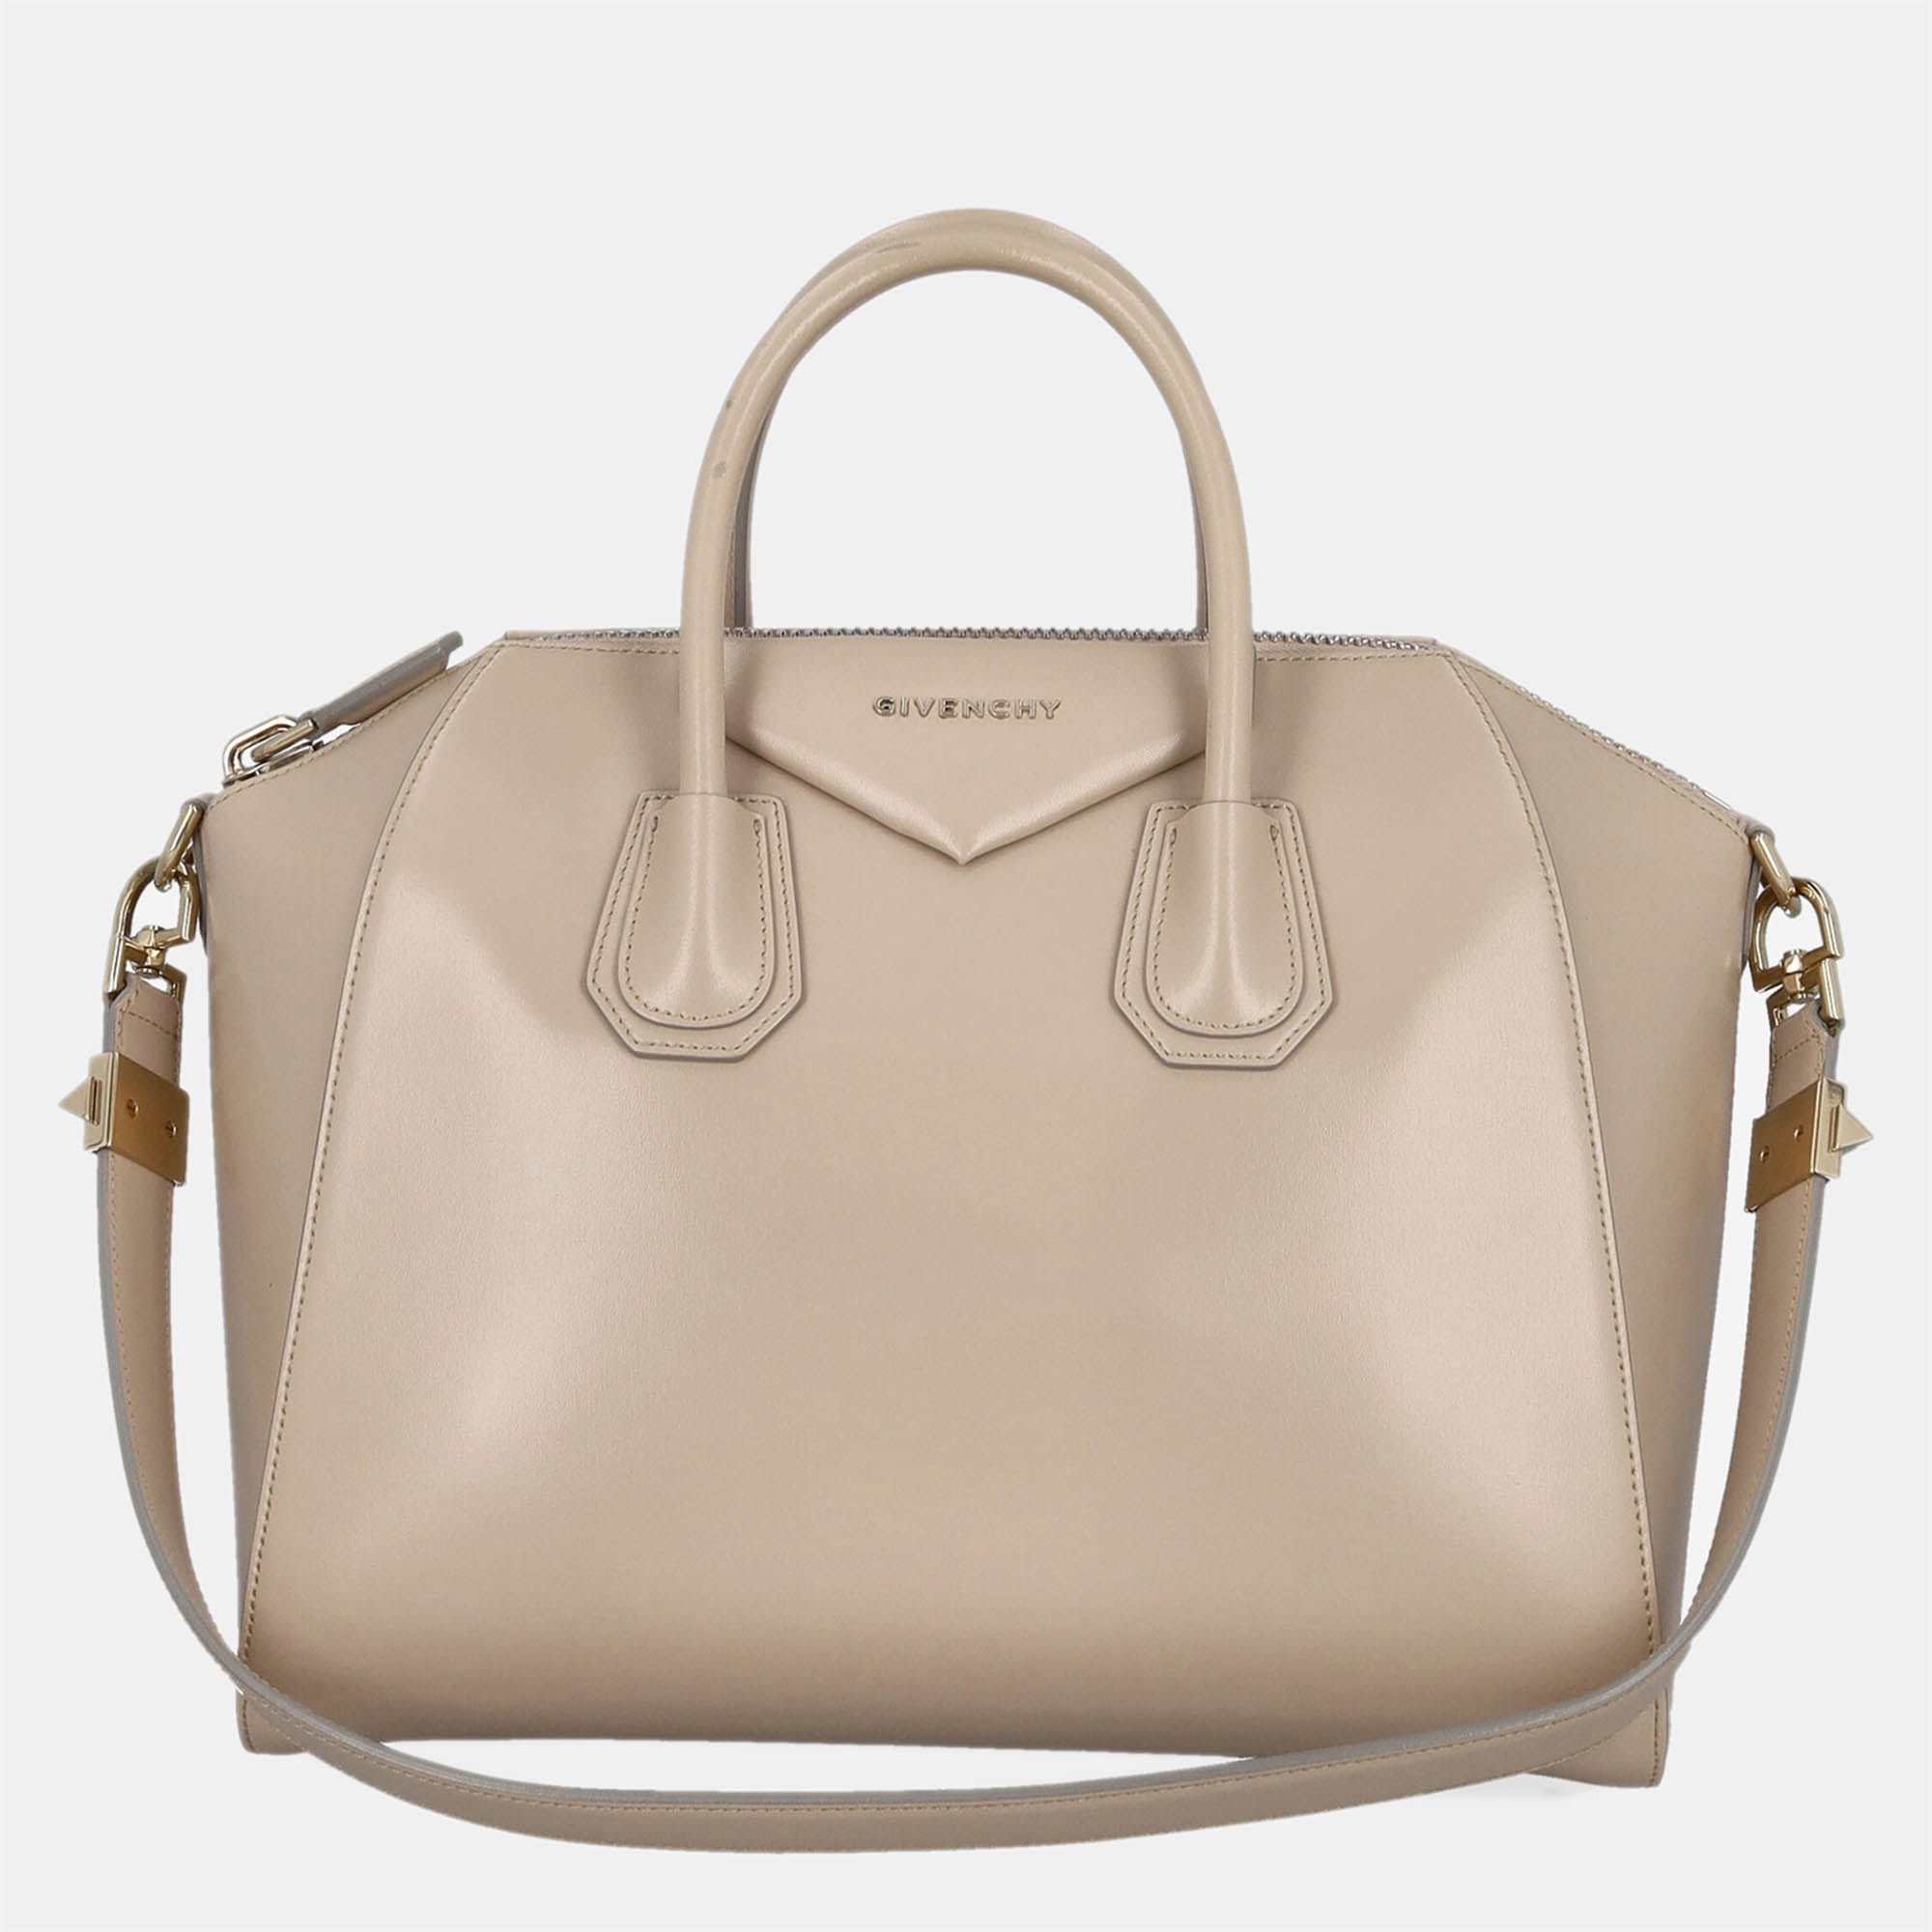 Givenchy  Women's Leather Tote Bag - Beige - One Size